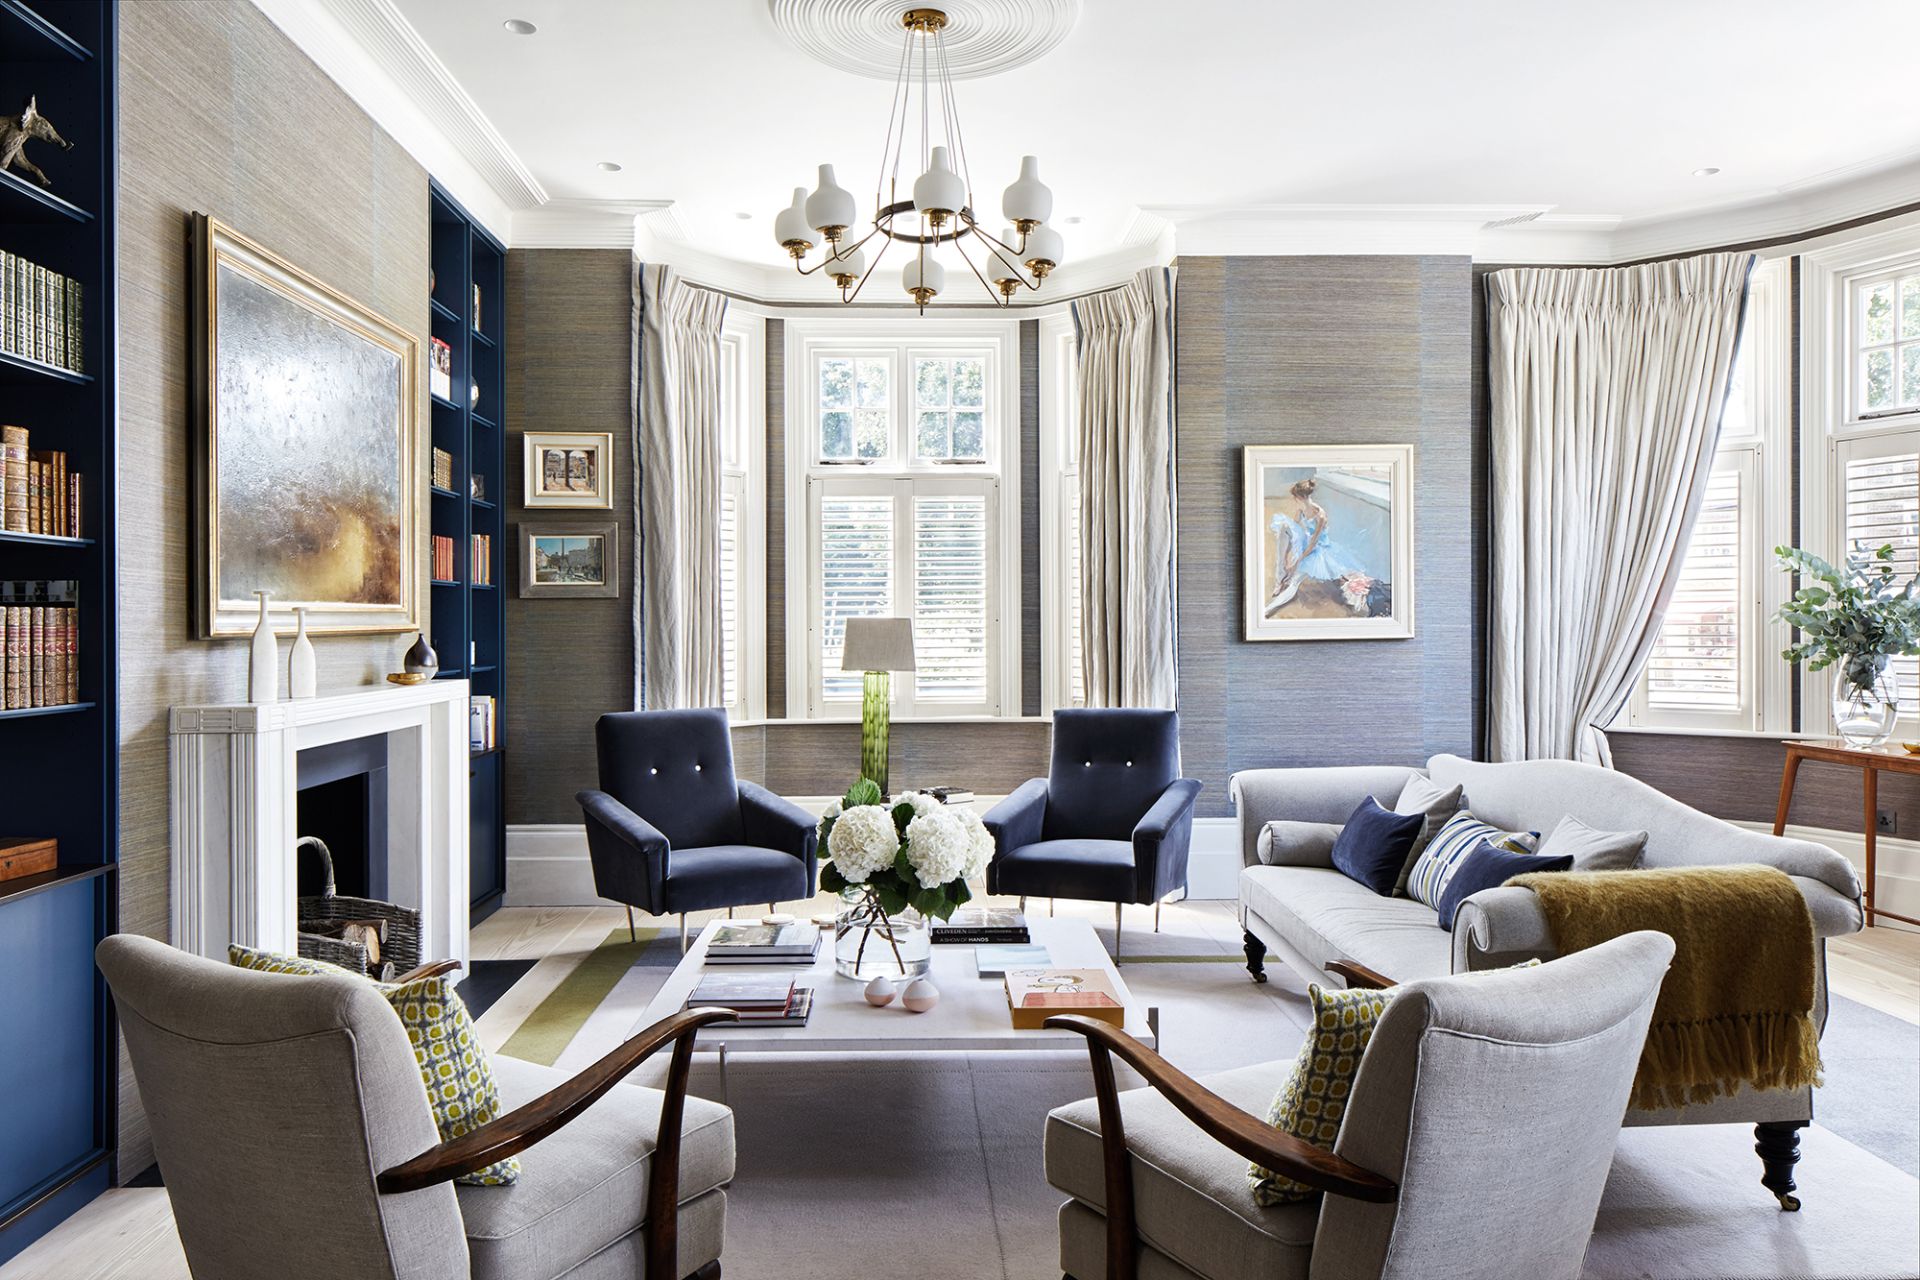 Blue and grey living room ideas – 10 ways to use this versatile pairing